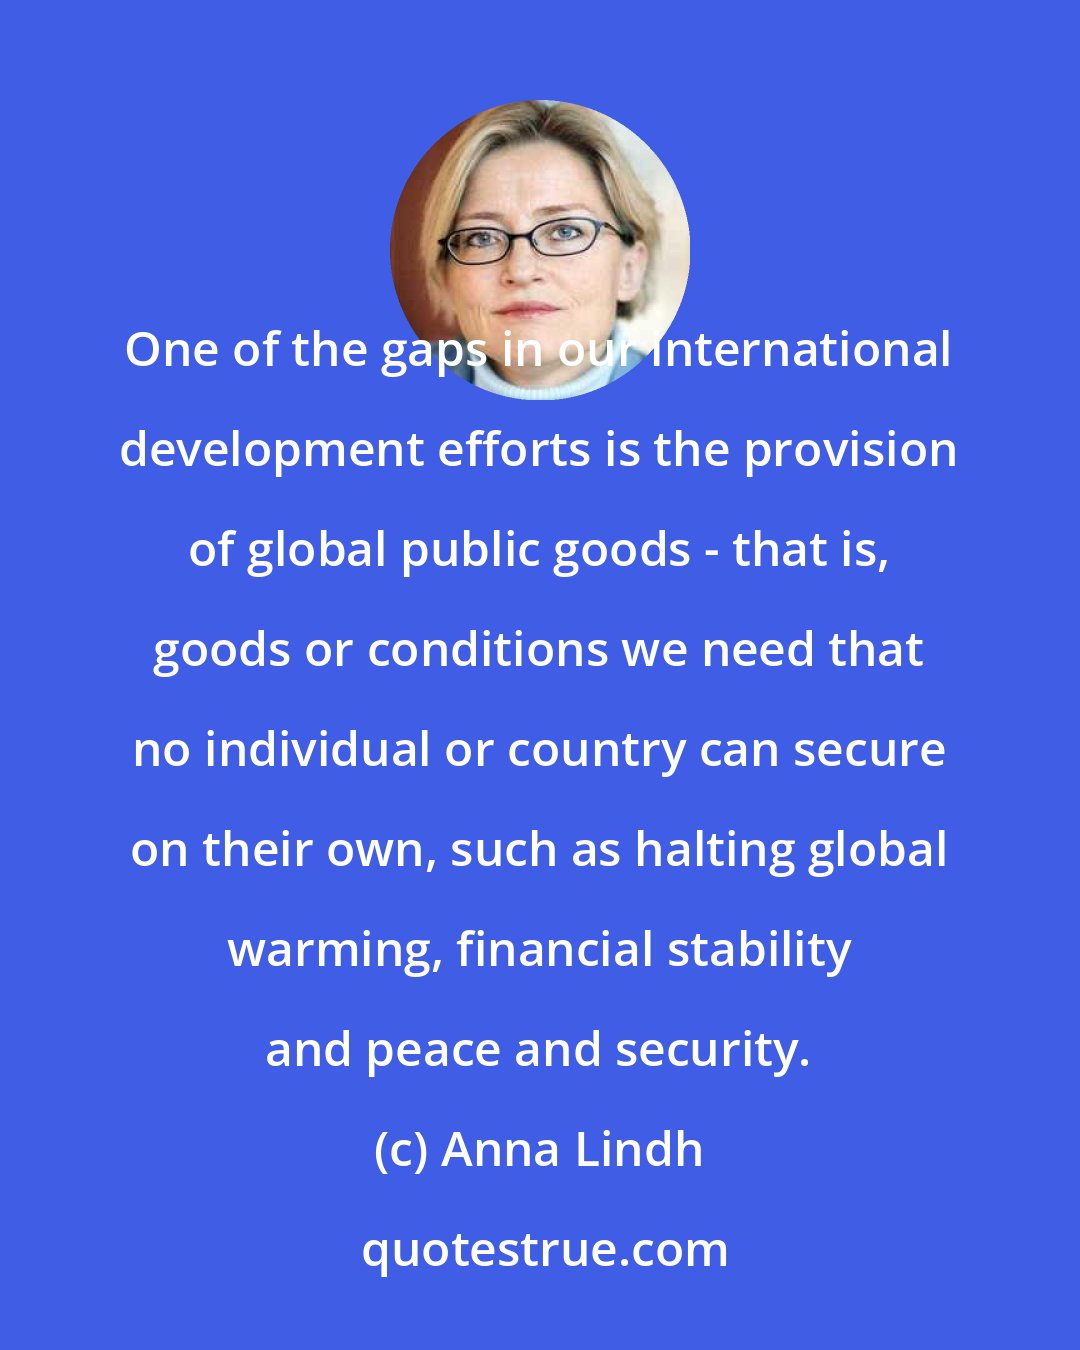 Anna Lindh: One of the gaps in our international development efforts is the provision of global public goods - that is, goods or conditions we need that no individual or country can secure on their own, such as halting global warming, financial stability and peace and security.